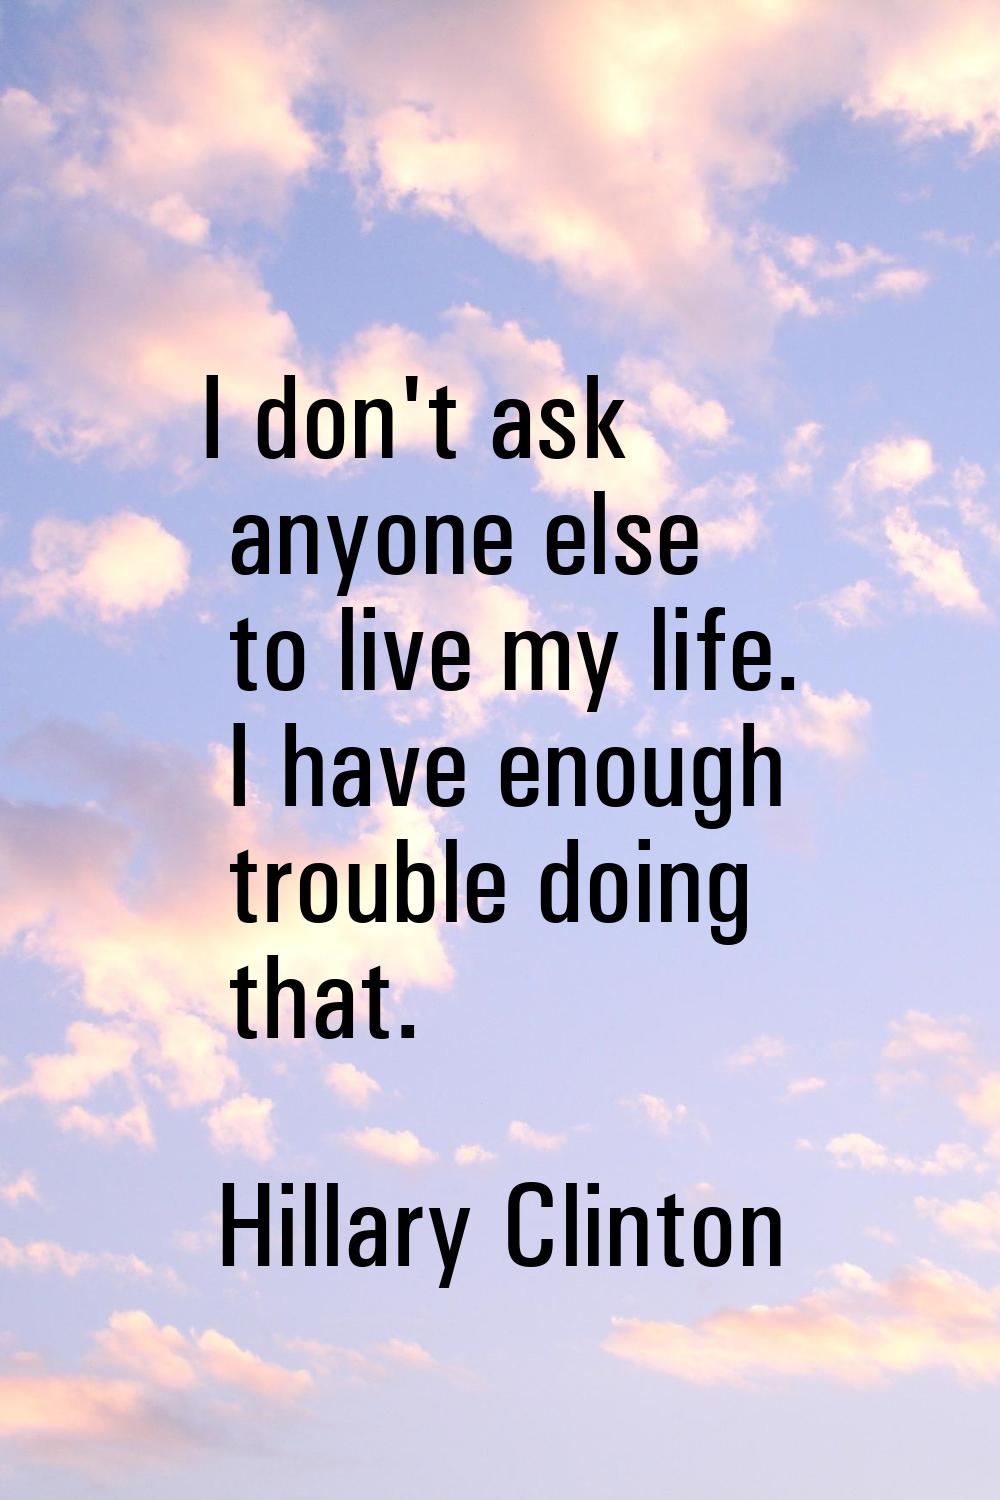 I don't ask anyone else to live my life. I have enough trouble doing that.